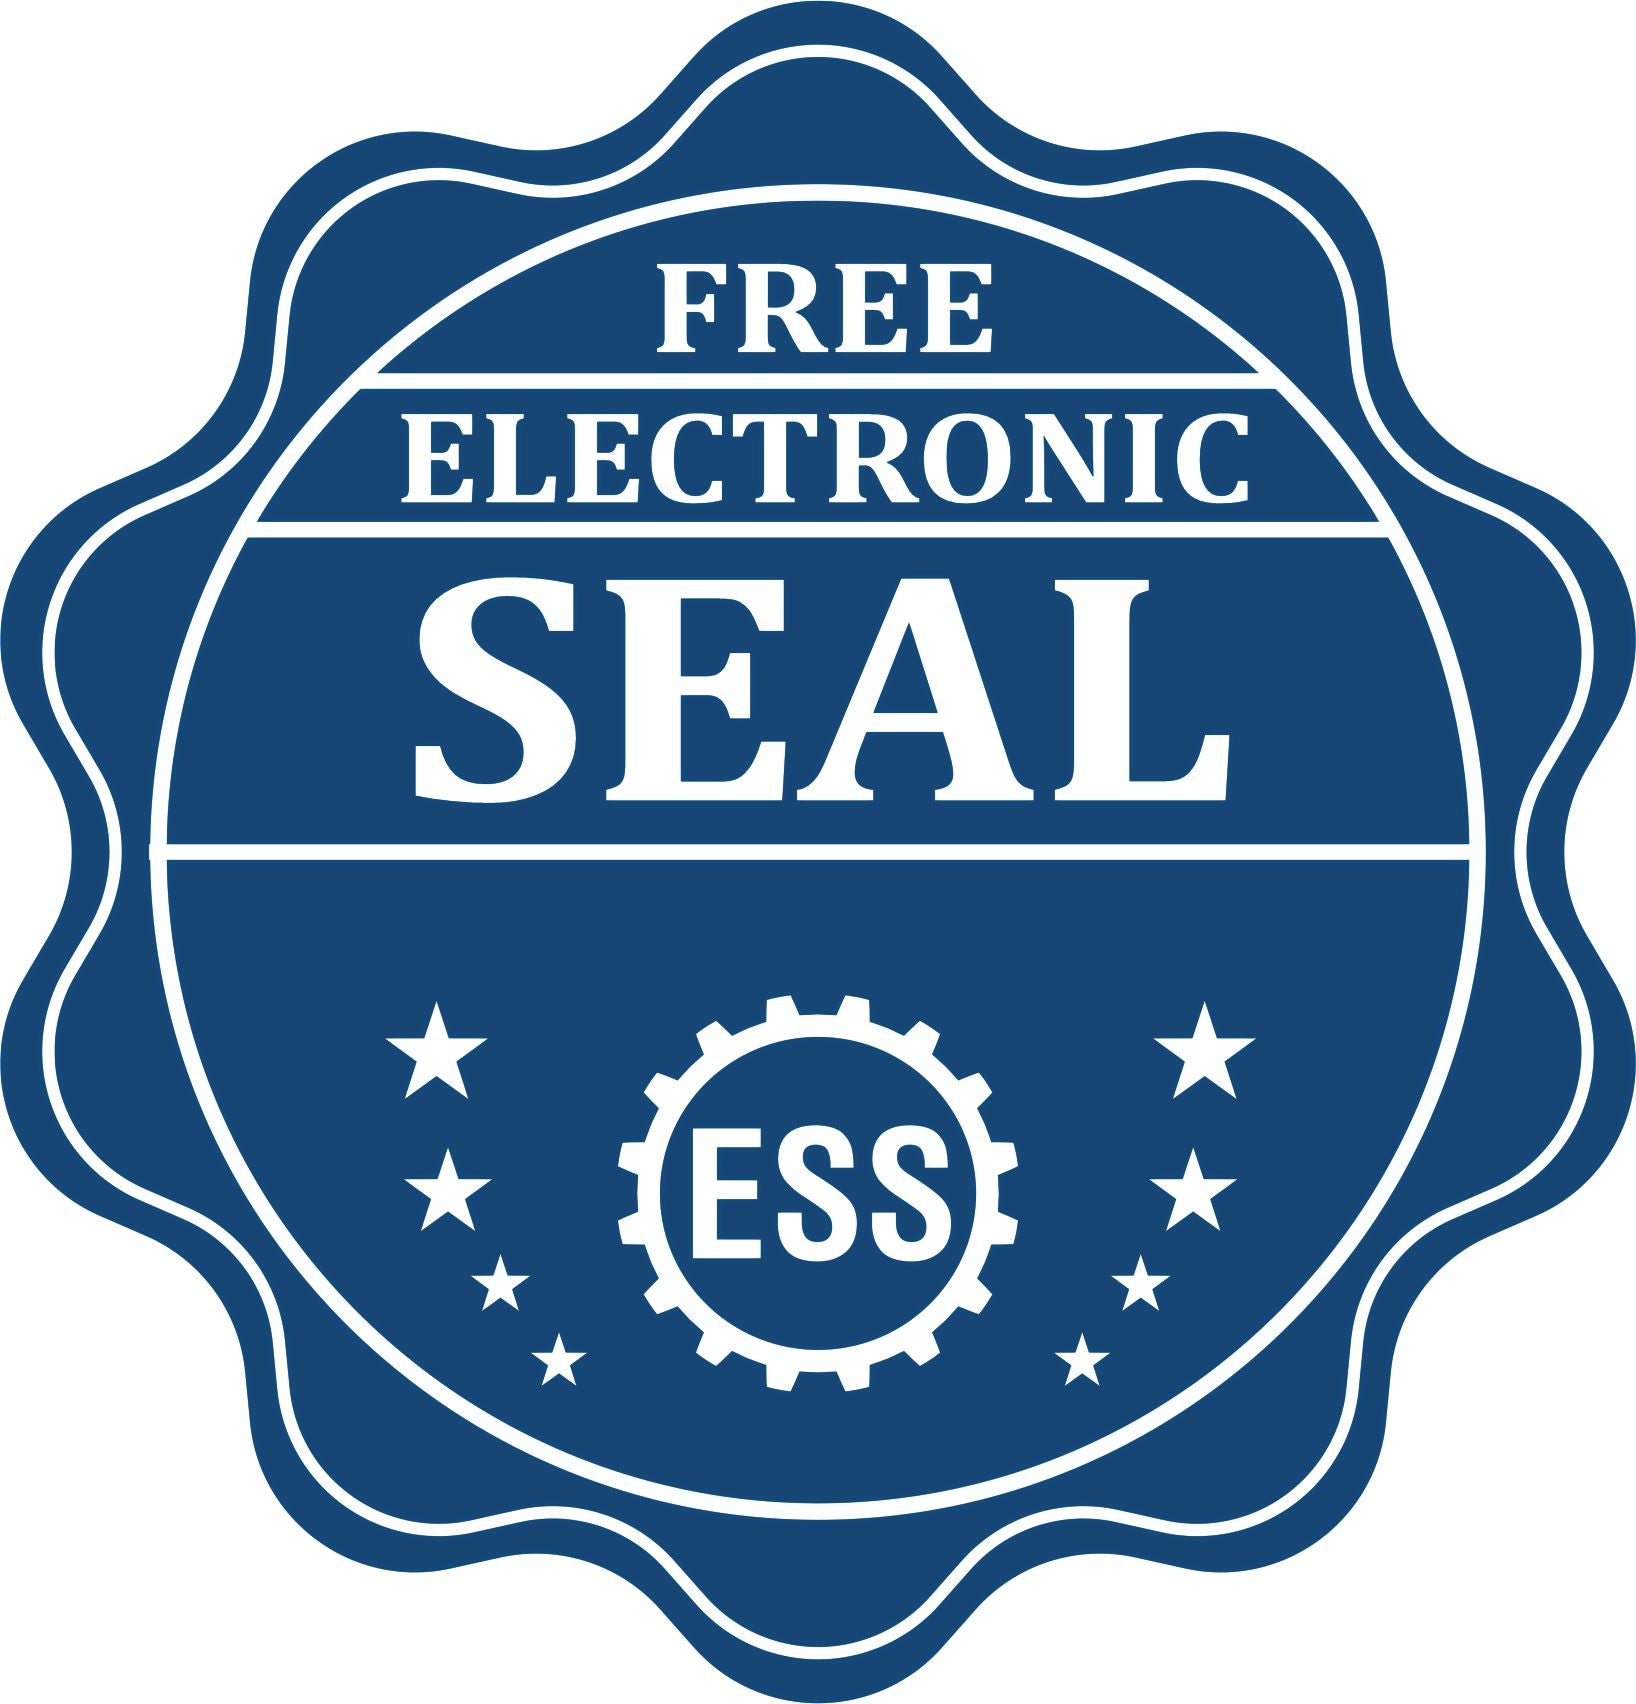 A badge showing a free electronic seal for the Gift Alaska Engineer Seal with stars and the ESS gear on the emblem.